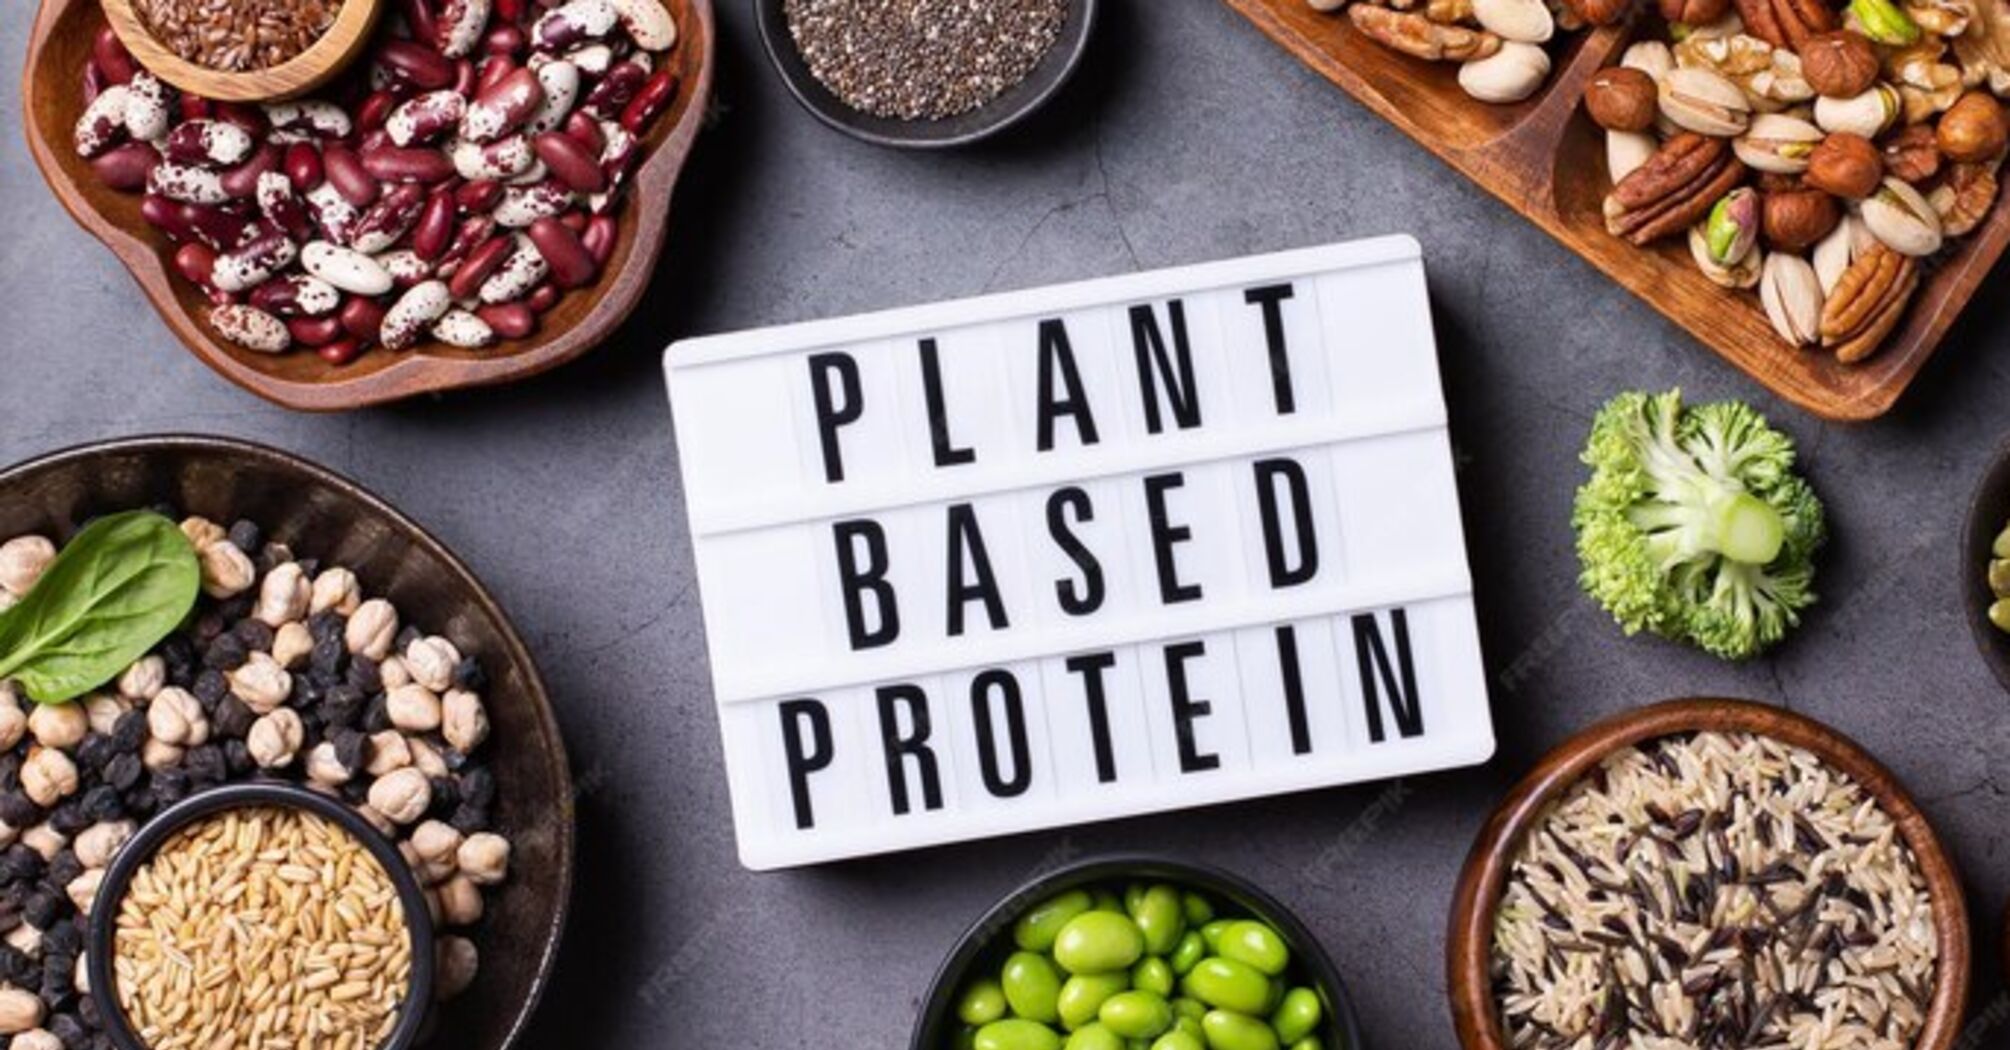 Not meat alone: The 6 best sources of plant protein